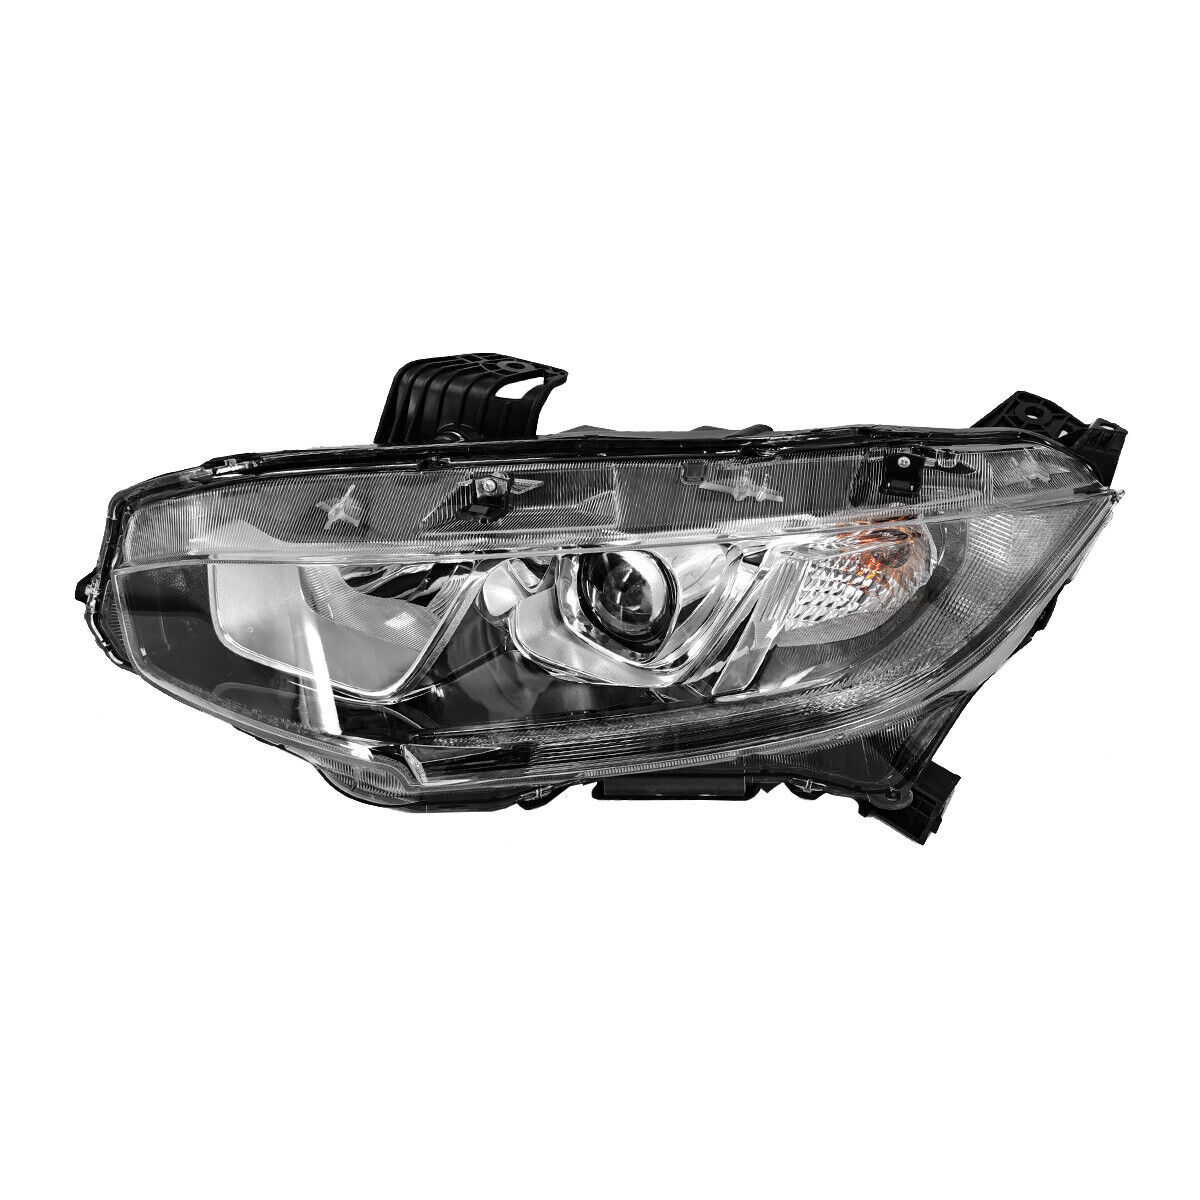 For Civic 2016-2020 Front Headlight Assembly Halogen w/Bulbs Left Side HO2502173